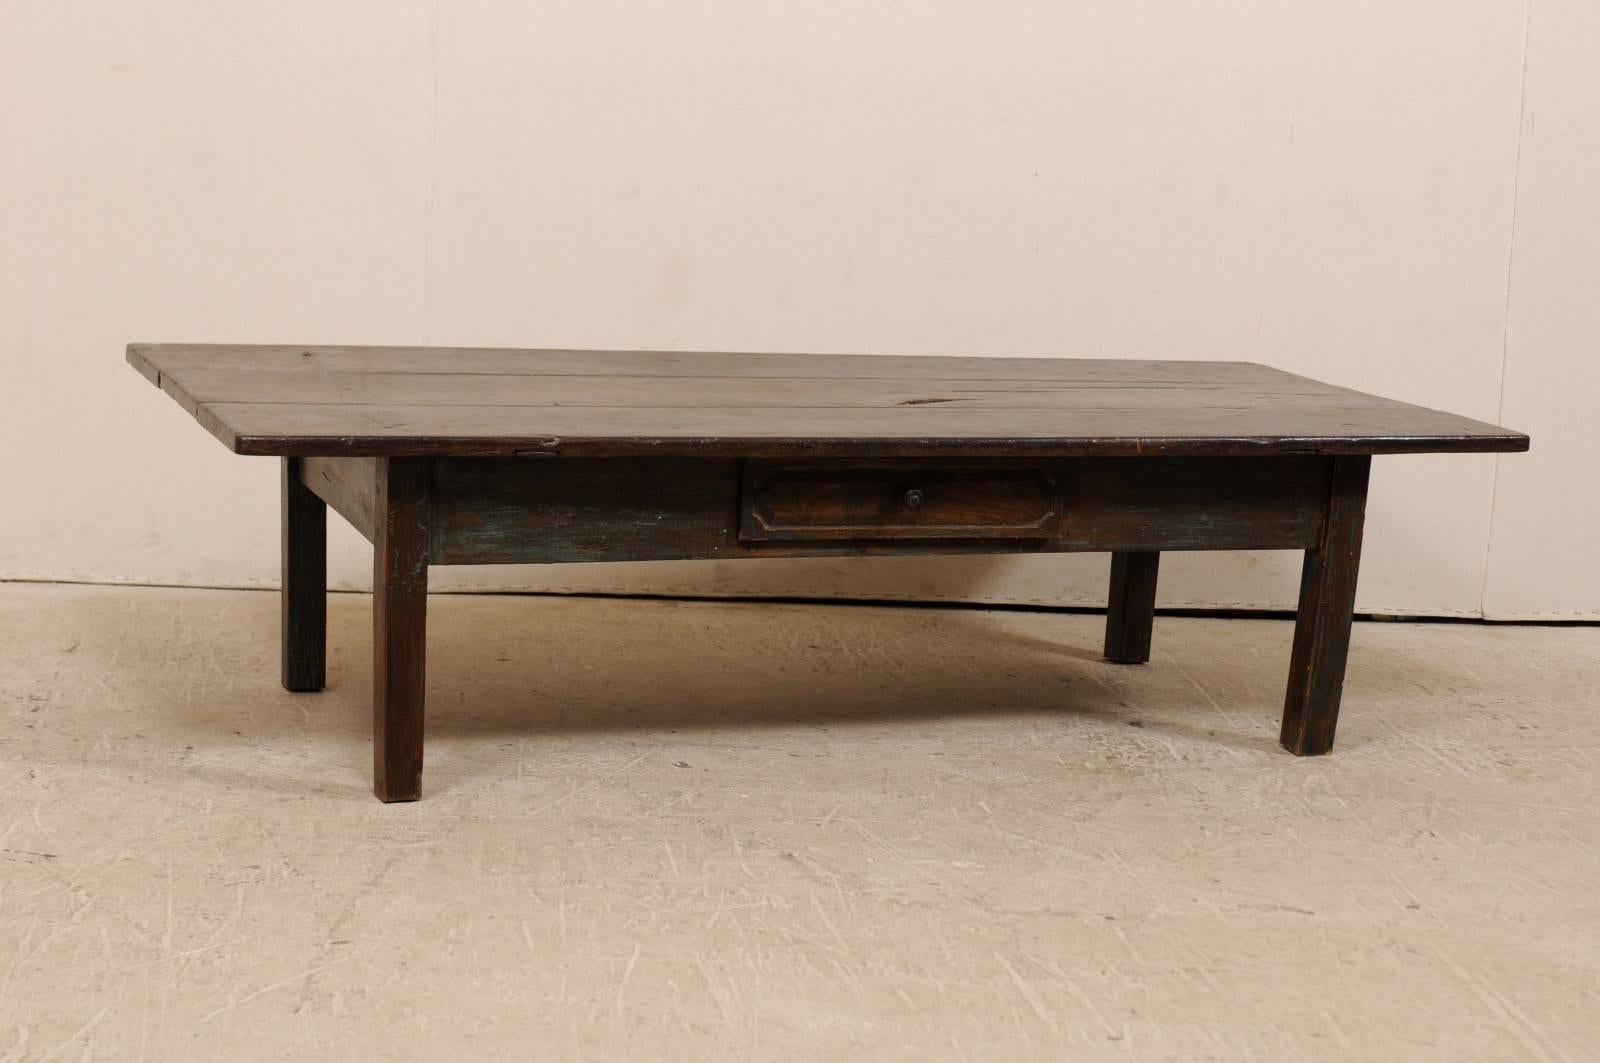 A 19th century Brazilian wood coffee table. This Brazilian table, from the late 19th century, features a single drawer, overhanging top, straight skirt, and is raised up on squared legs. The table is peroba wood (a tropical native hardwood, 35%